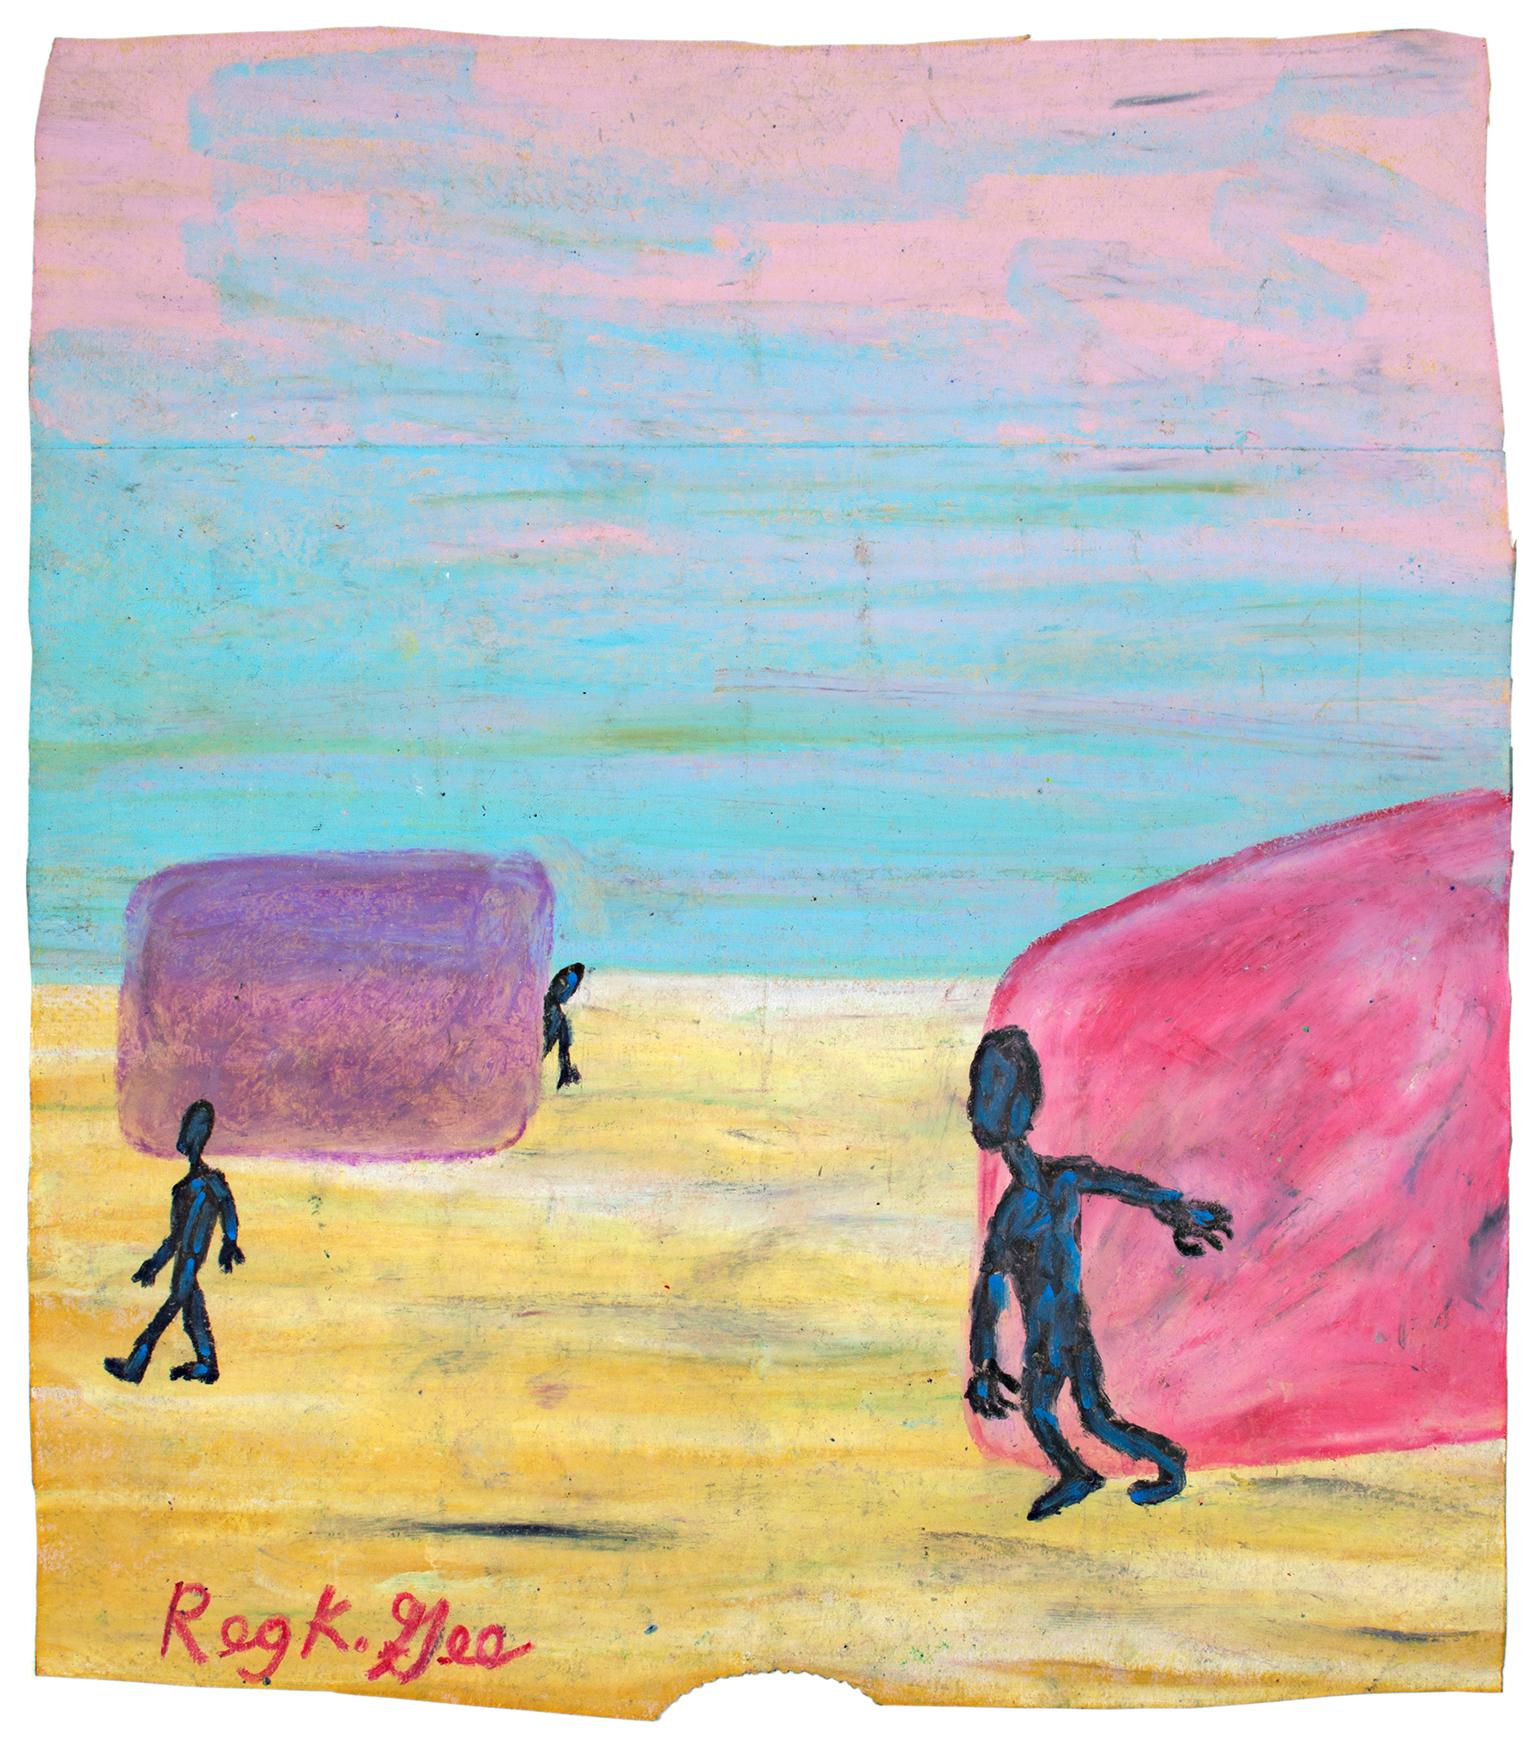 "Territory, " Oil Pastel on Grocery Bag signed by Reginald K. Gee